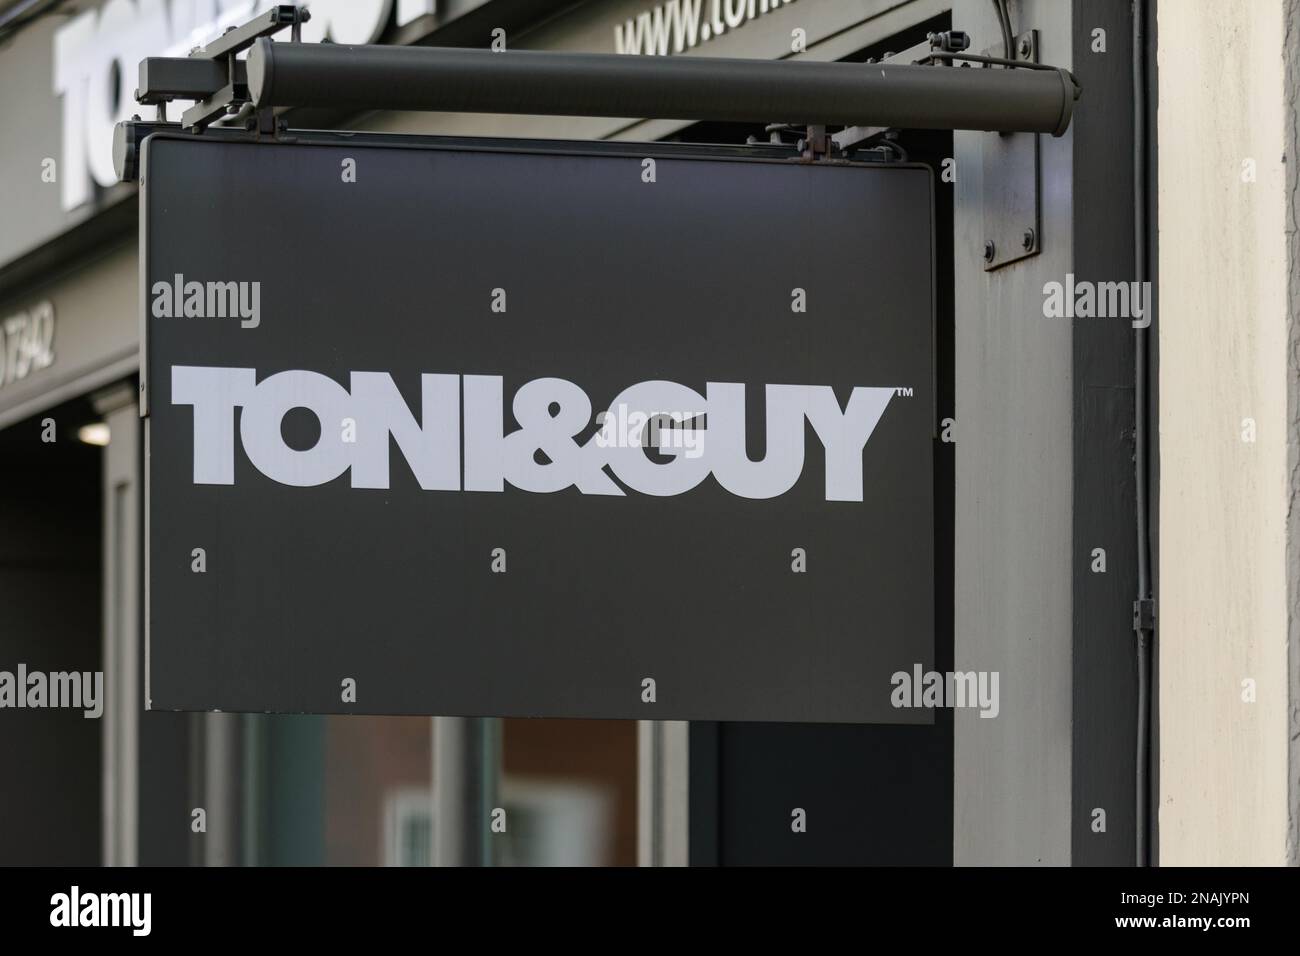 A sign outside a Toni and Guy hair salon in central London advertises their hairdressing and beauty services to men and women Stock Photo